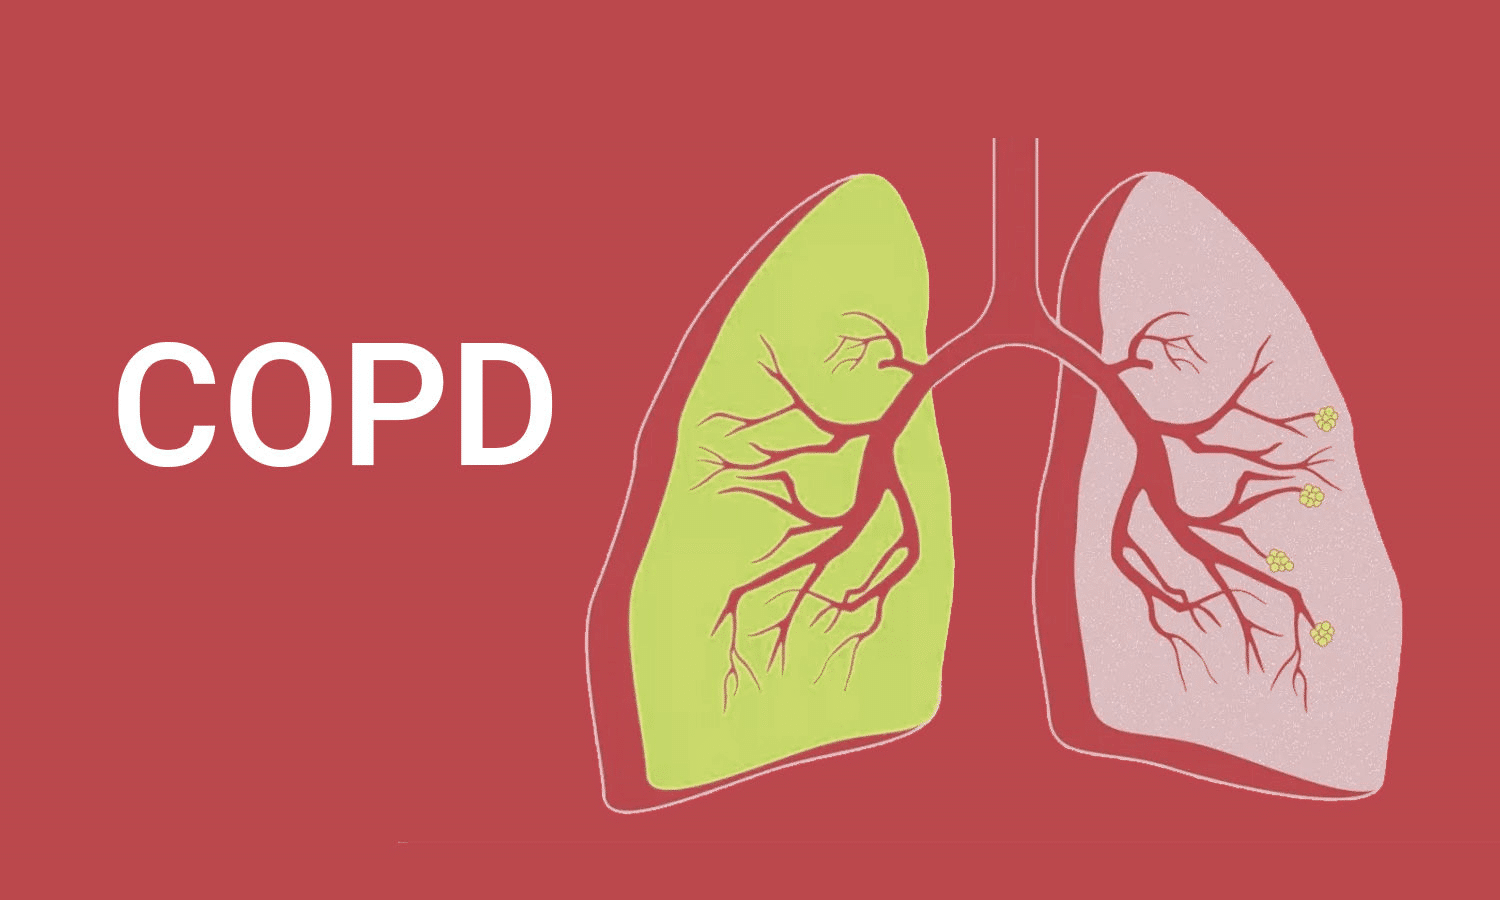 Copd meaning